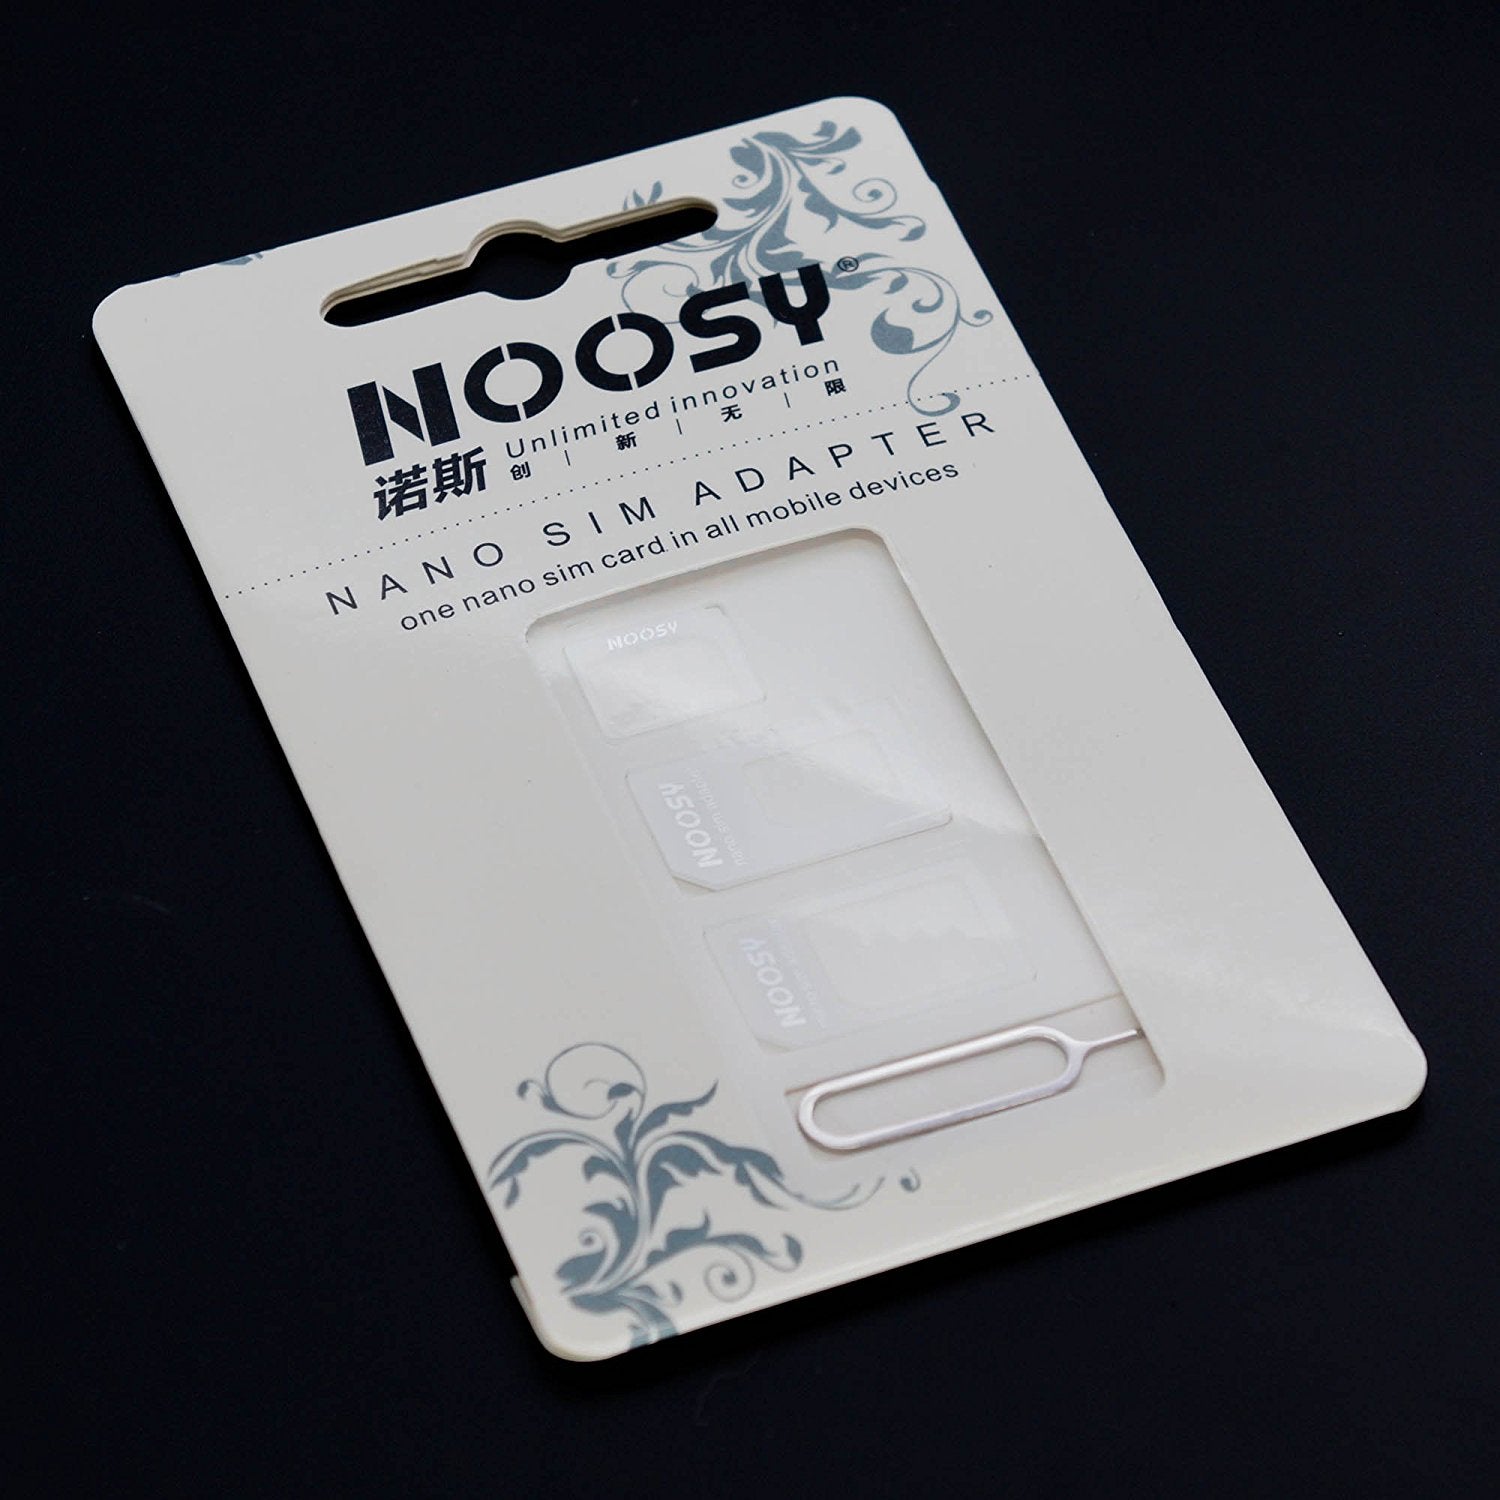 CyberTech By Noosy [2nd Generation] Micro SIM Cutter (Color: Black or Silver), with 2 SIM adapters